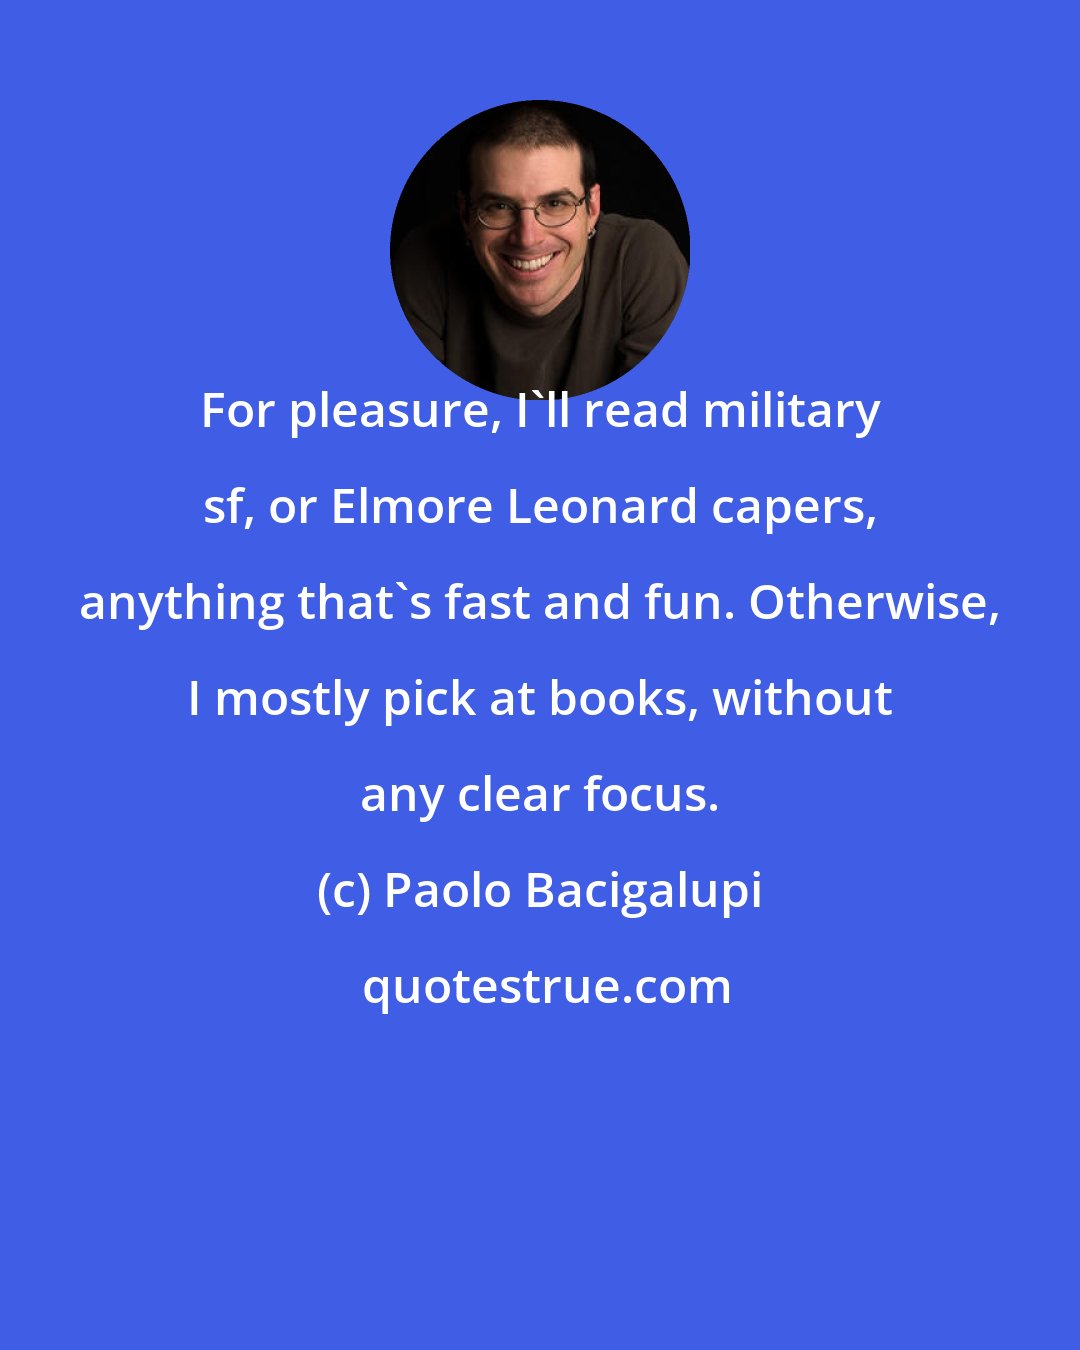 Paolo Bacigalupi: For pleasure, I'll read military sf, or Elmore Leonard capers, anything that's fast and fun. Otherwise, I mostly pick at books, without any clear focus.